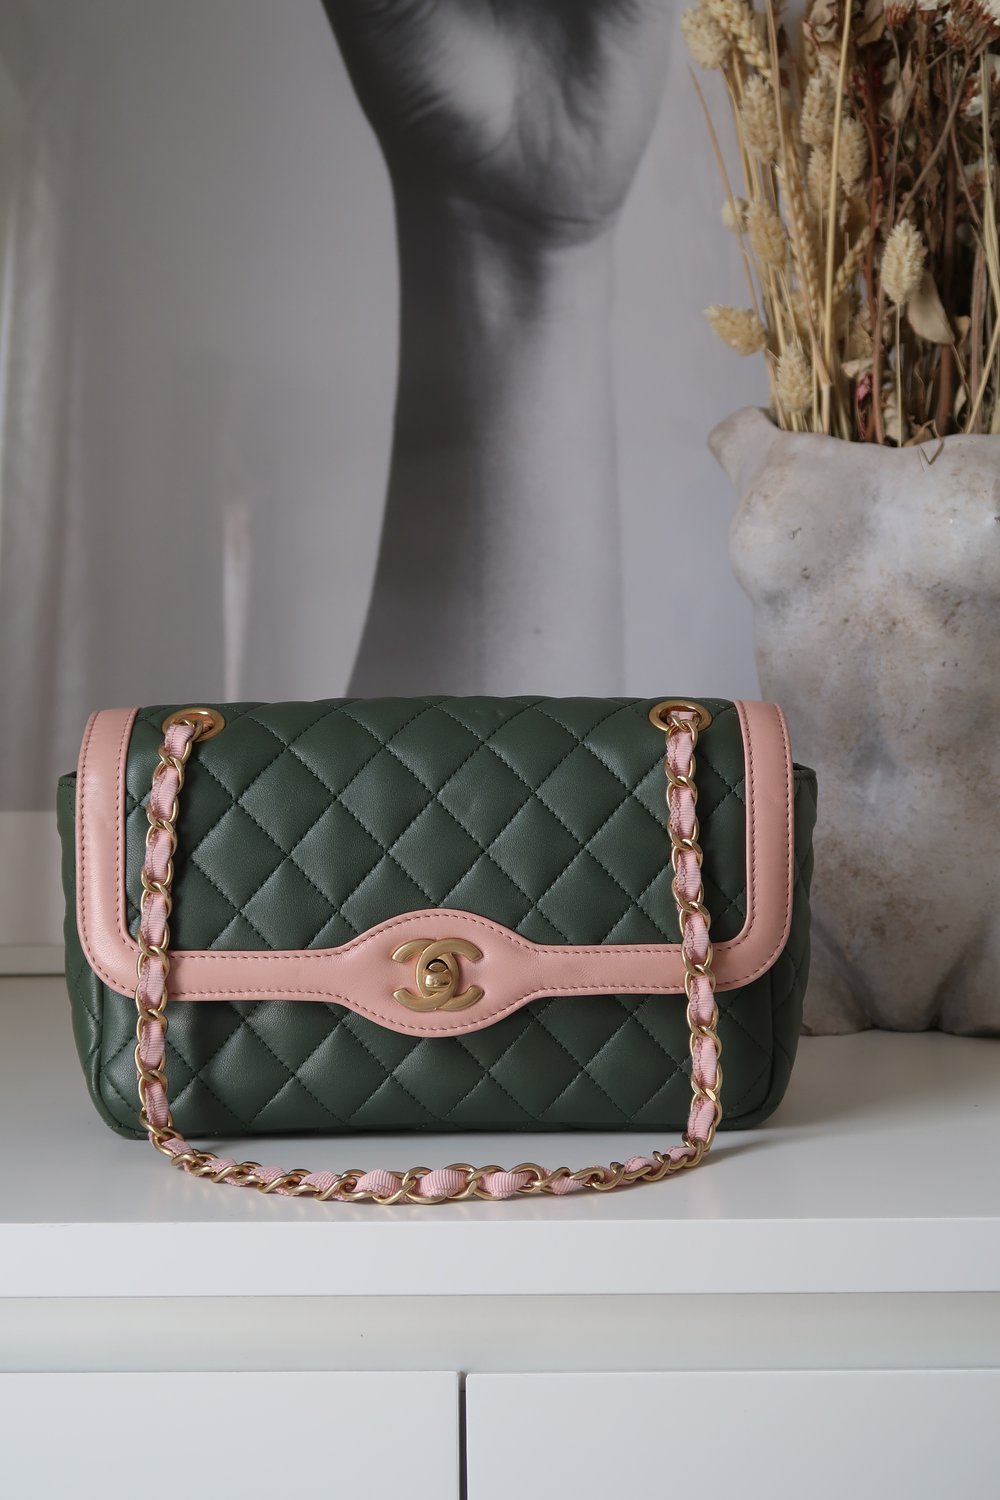 Chanel 2017 Two Tone Green & Pink Flap Bag Cruise Collection — Blaise Ruby  Loves